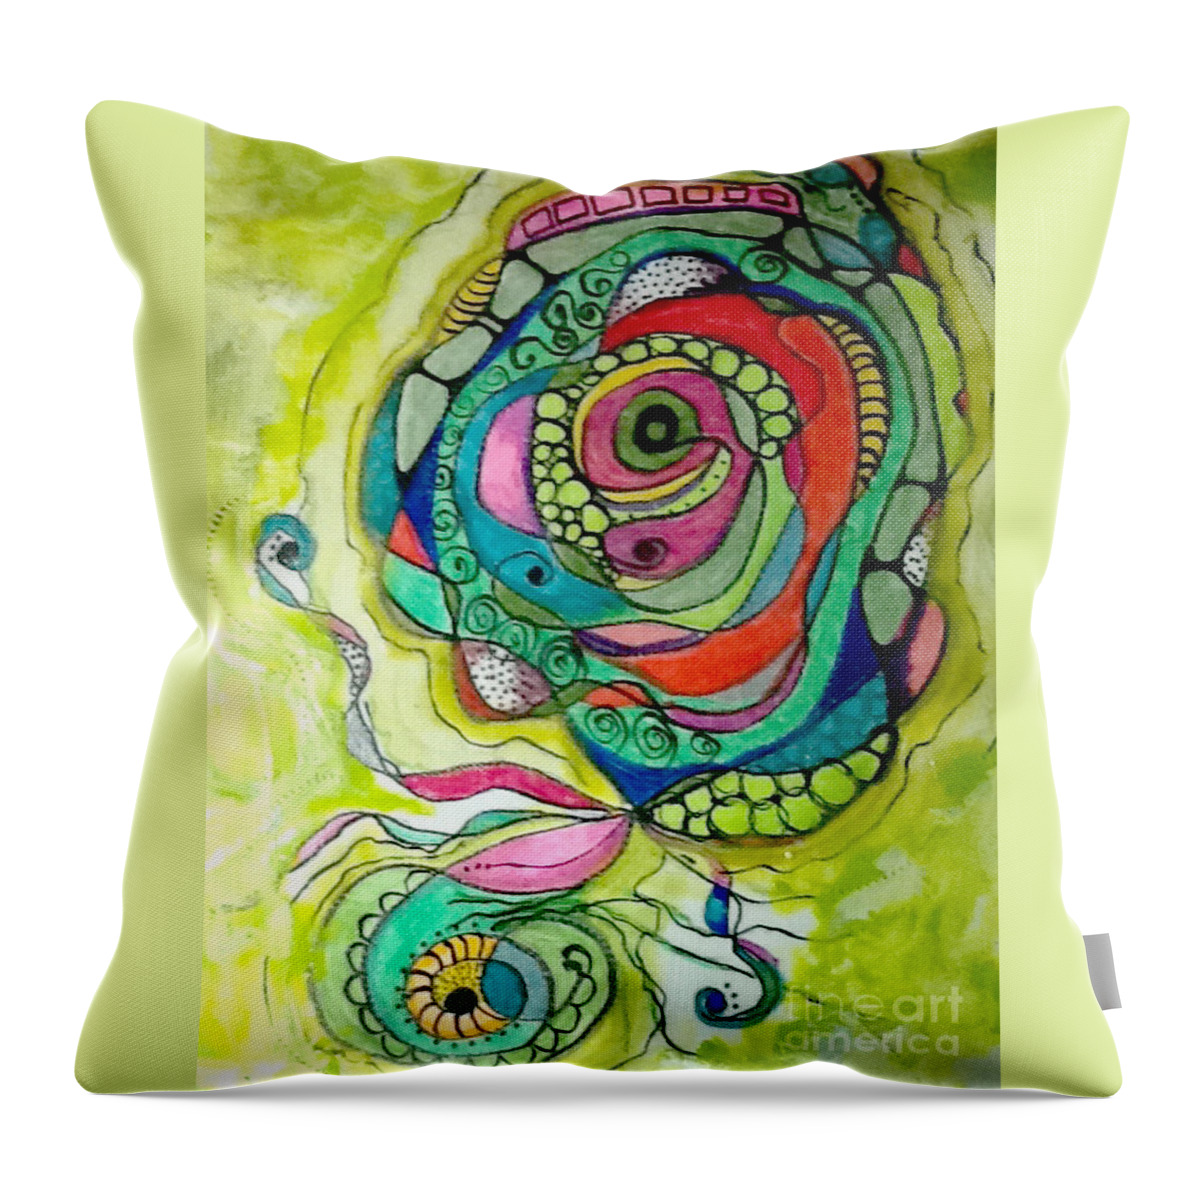 Circles And Swirls Throw Pillow featuring the mixed media Circles by Ruth Dailey